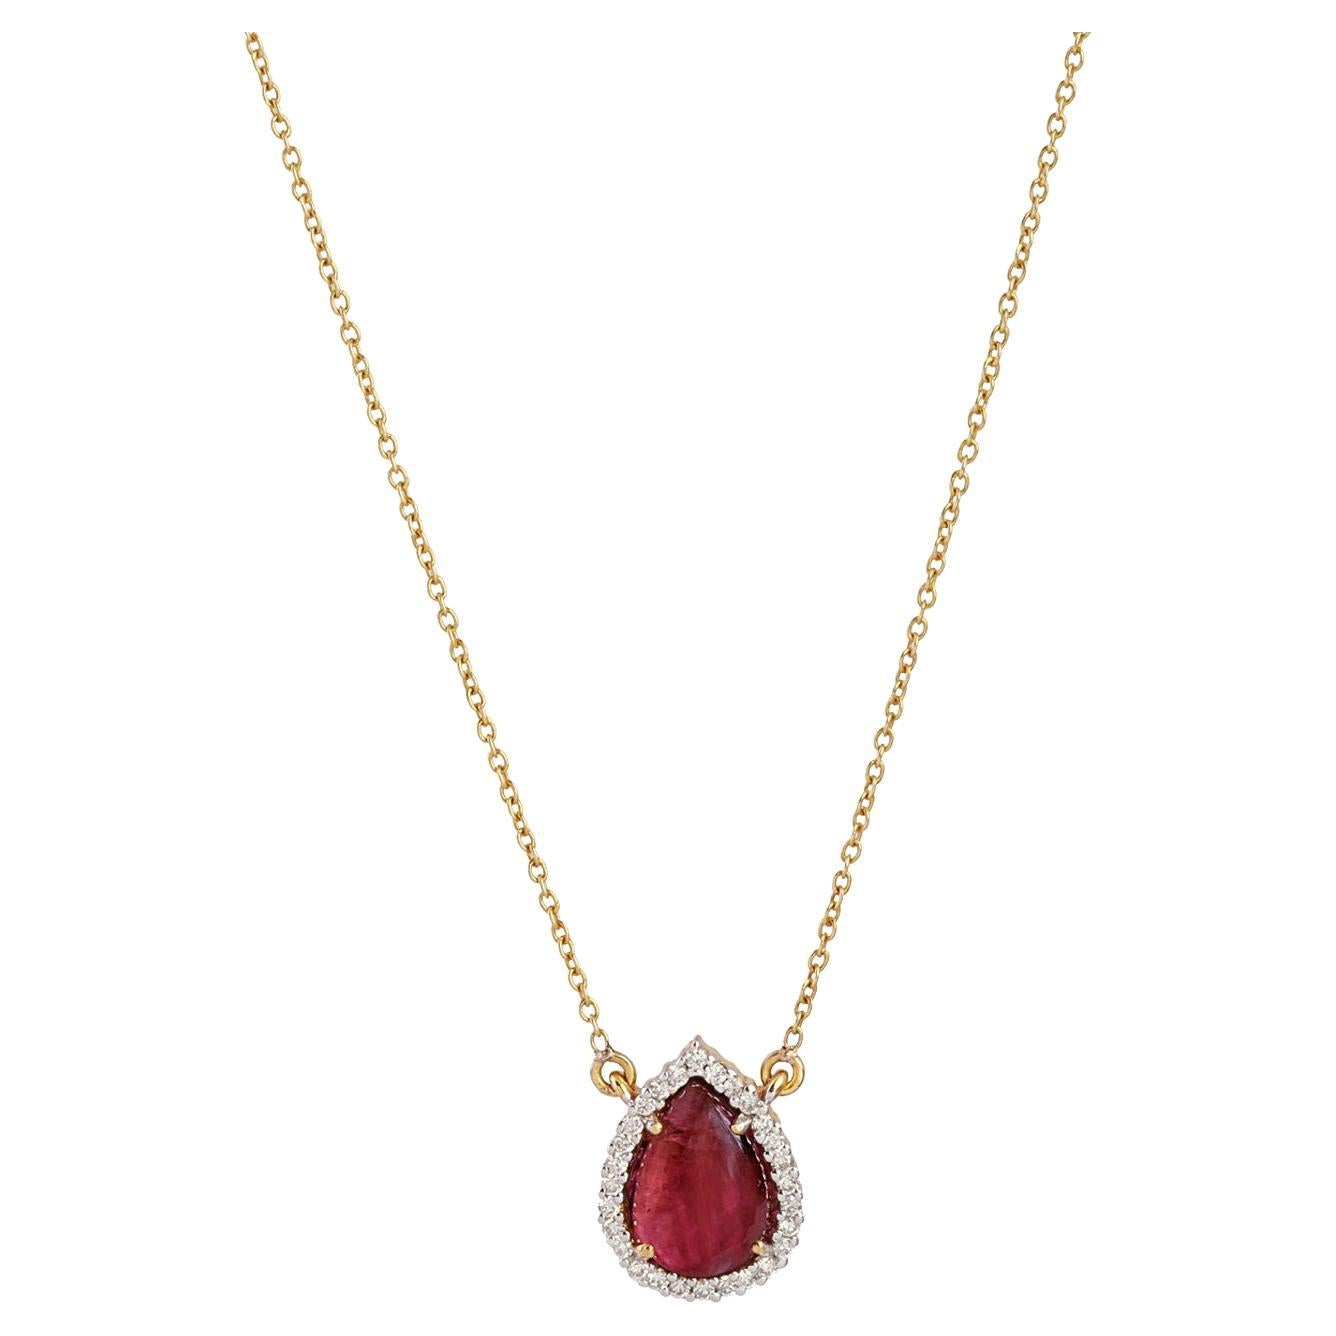 Pink Tourmaline and Diamond Pendant with Chain in 14k Gold